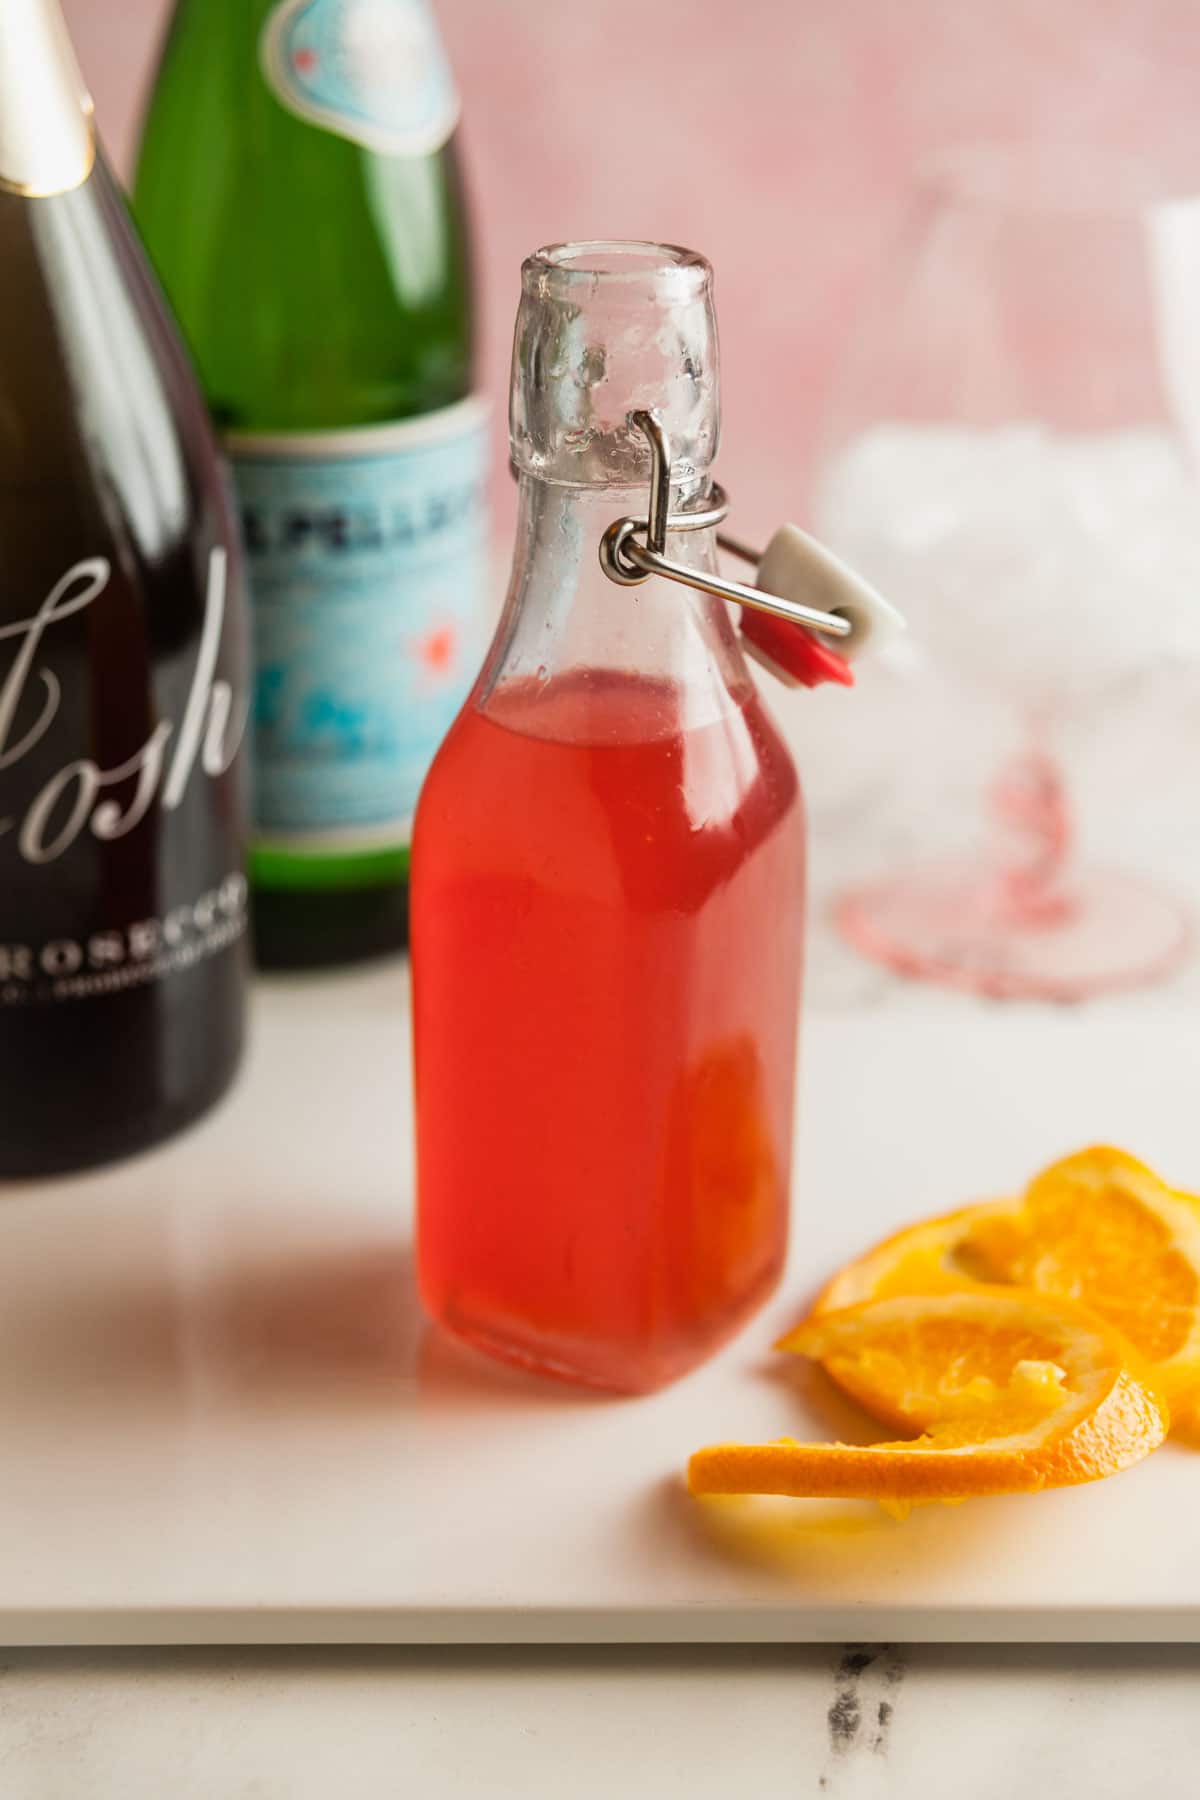 Ingredients needed to make a rhubarb spritz, including homemade rhubarb syrup, prosecco, and sparkling water.